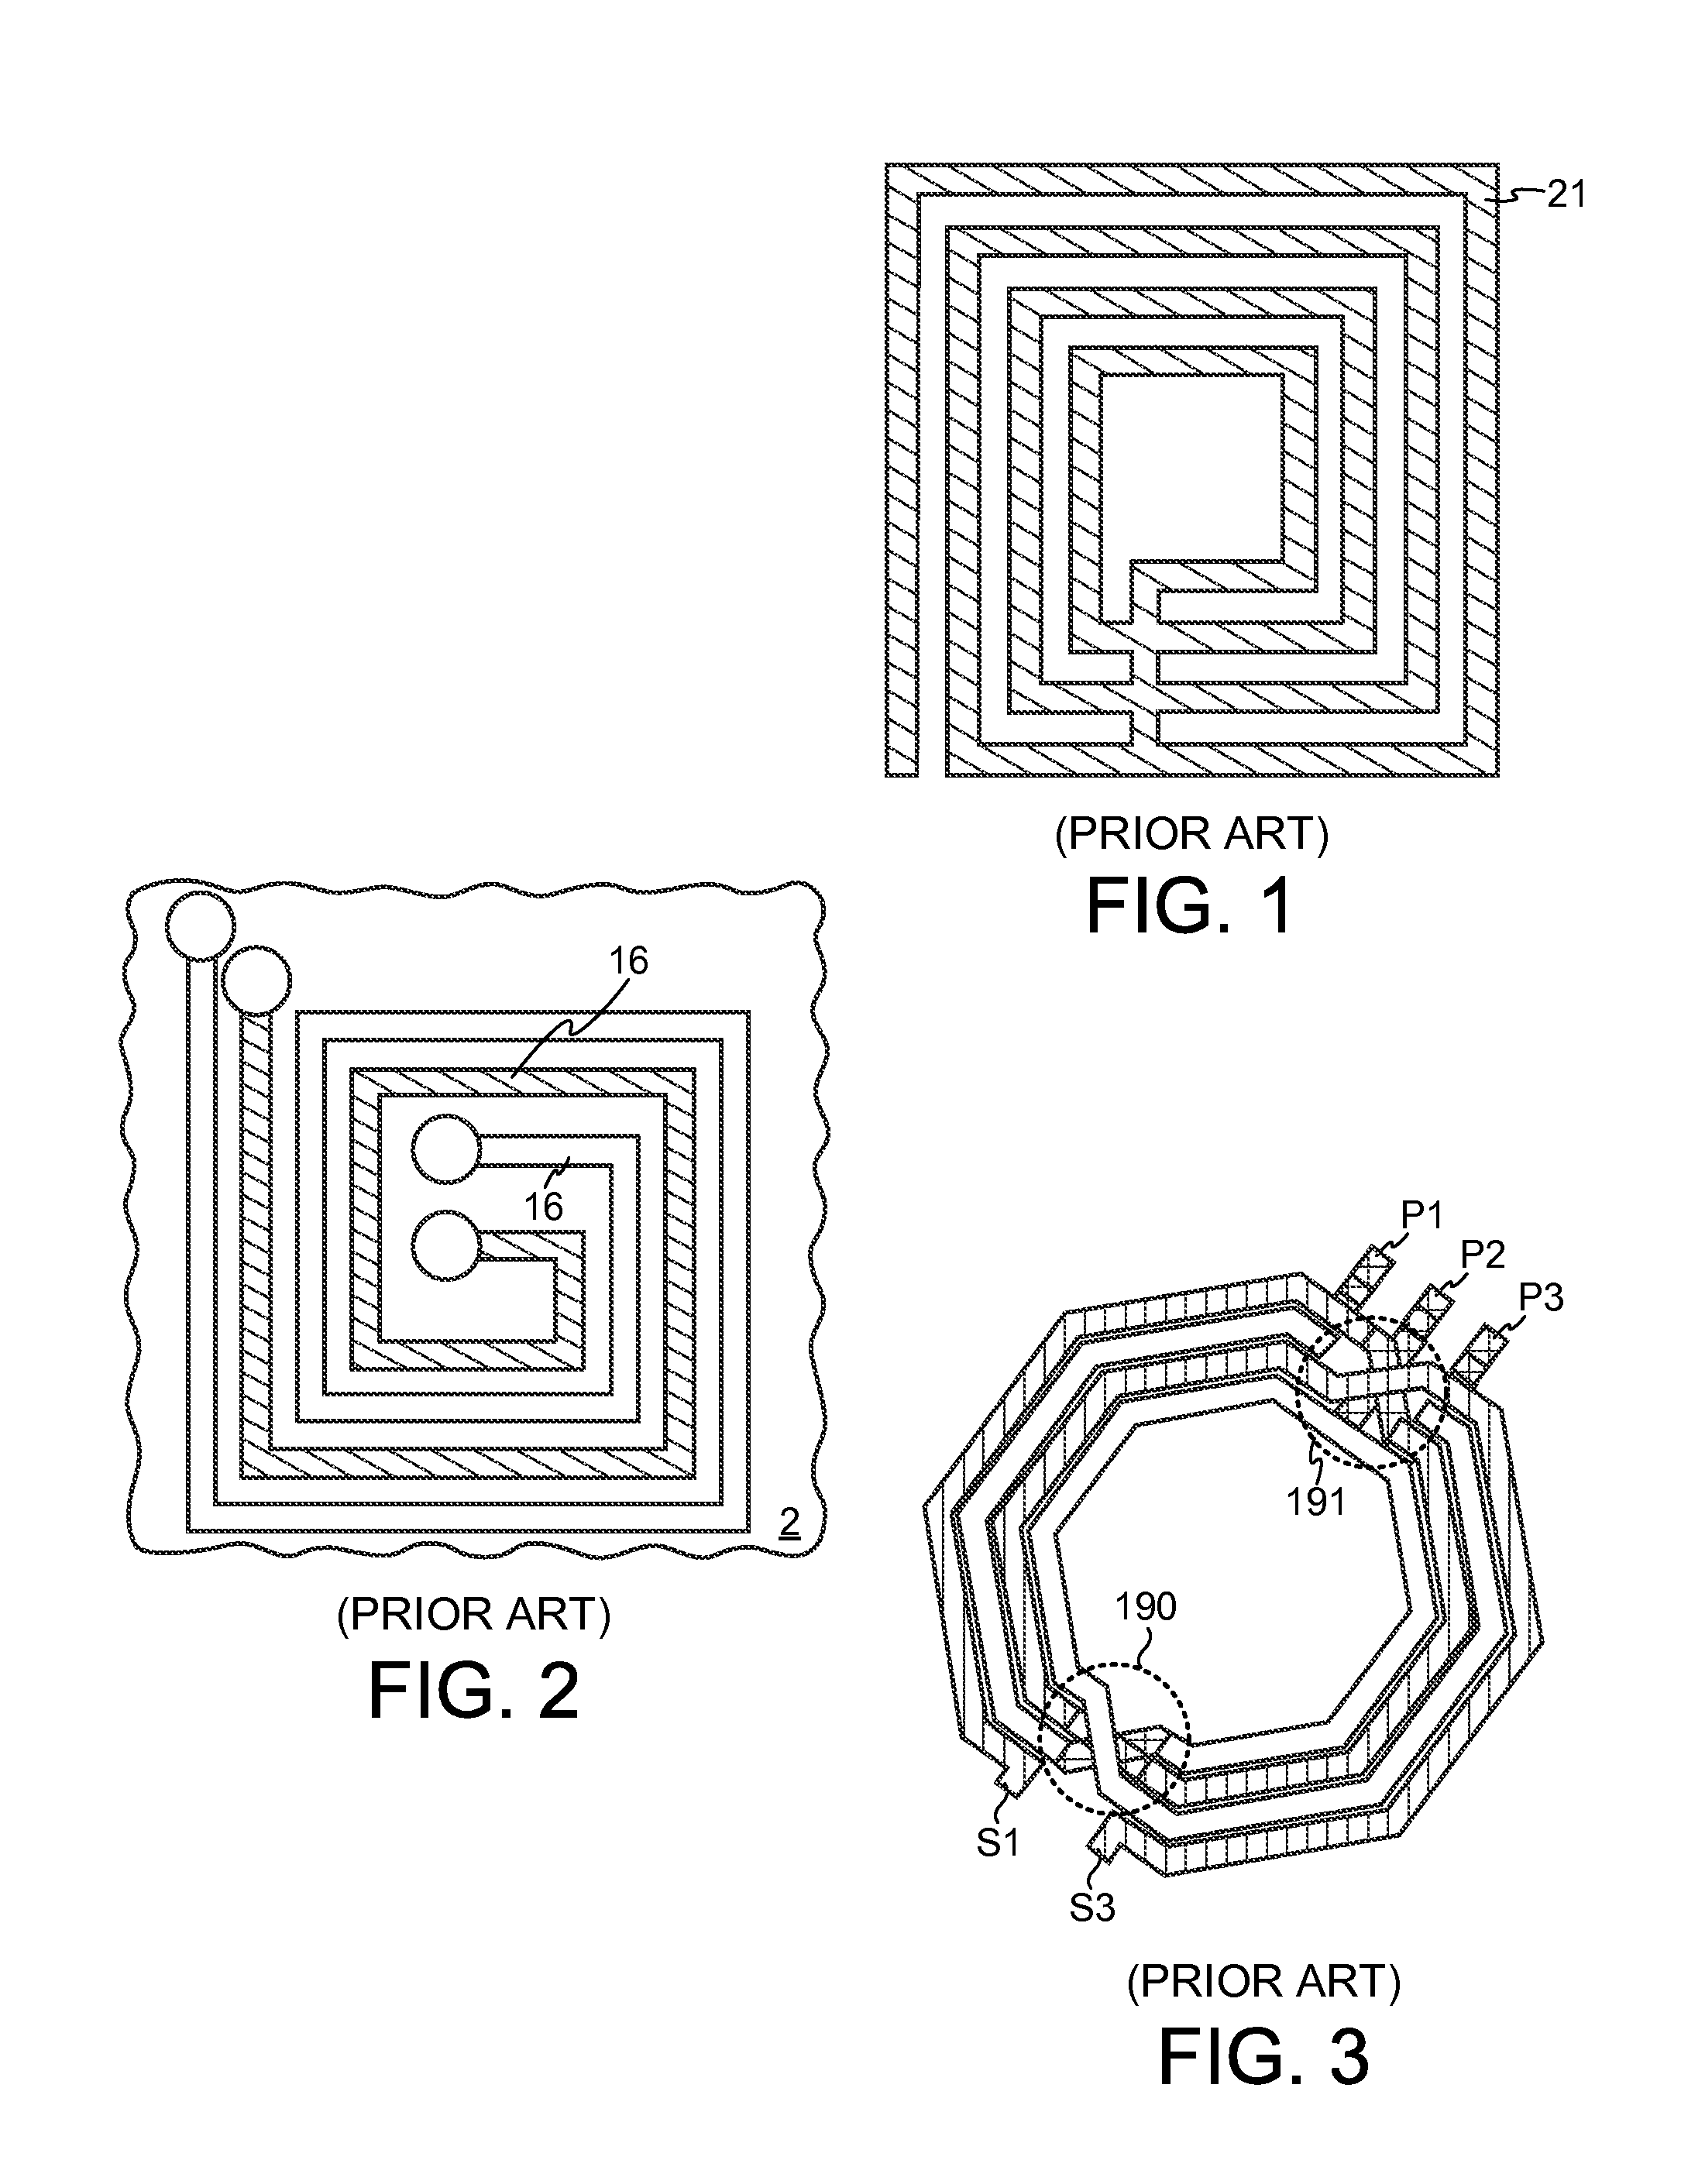 High q transformer disposed at least partly in a non-semiconductor substrate